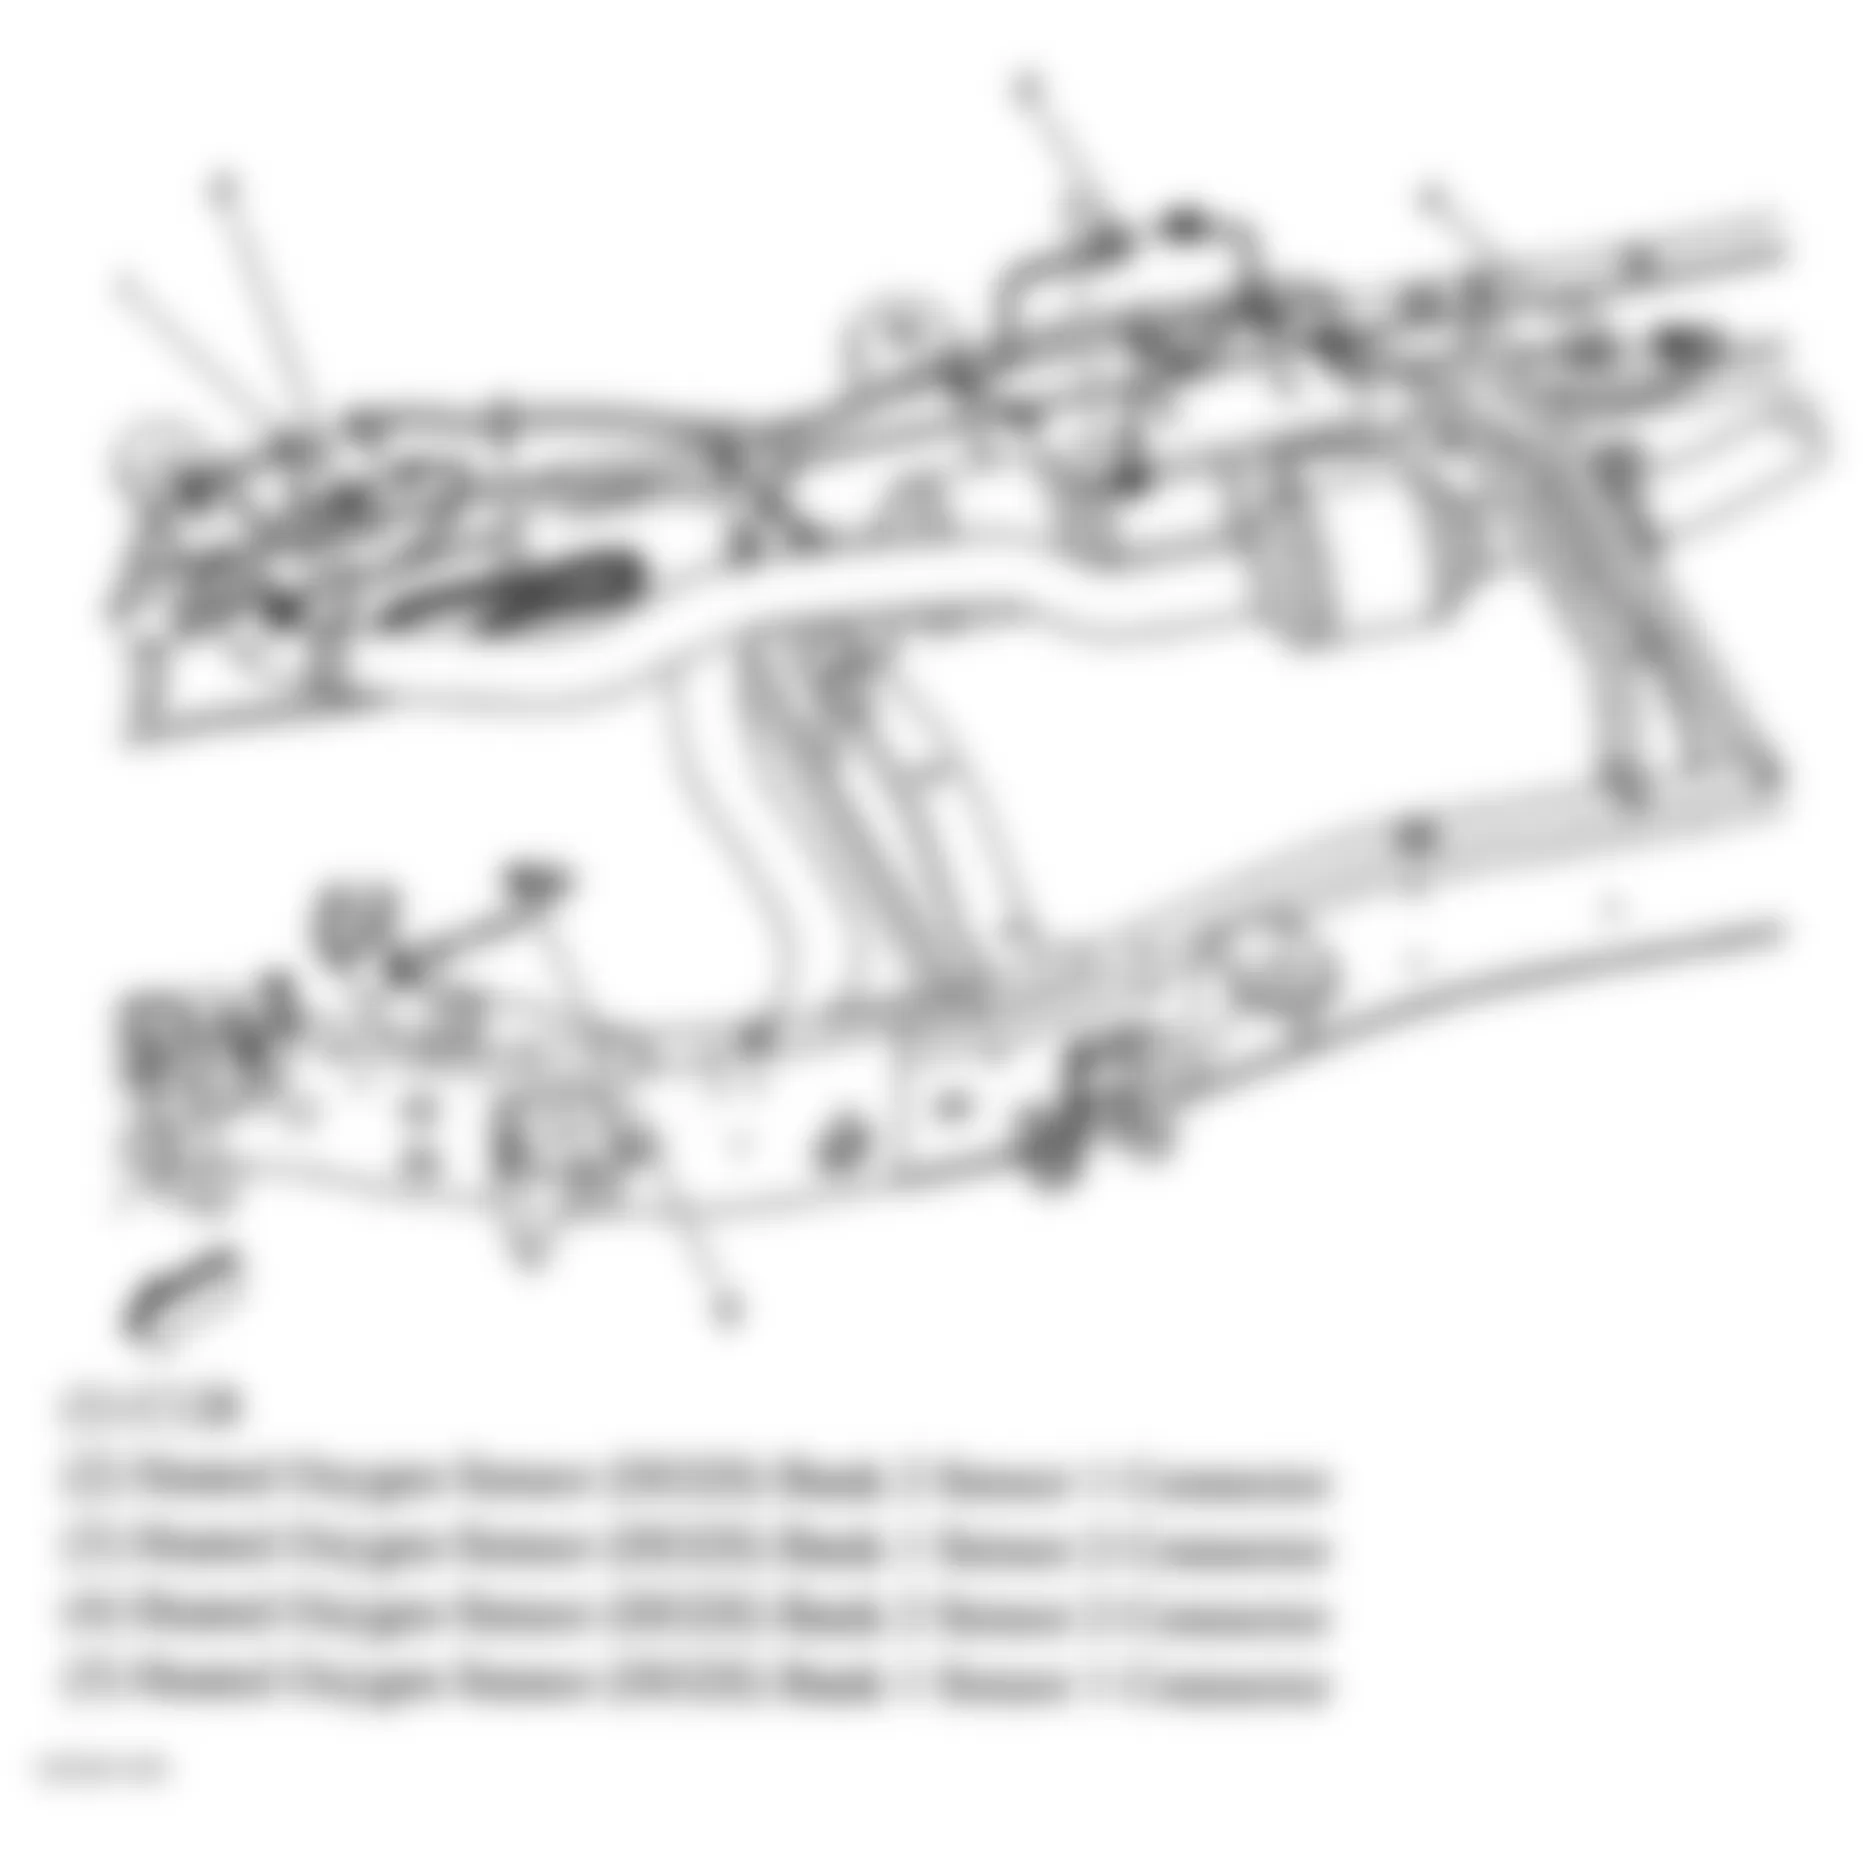 GMC Savana H1500 2006 - Component Locations -  Center Of Chassis